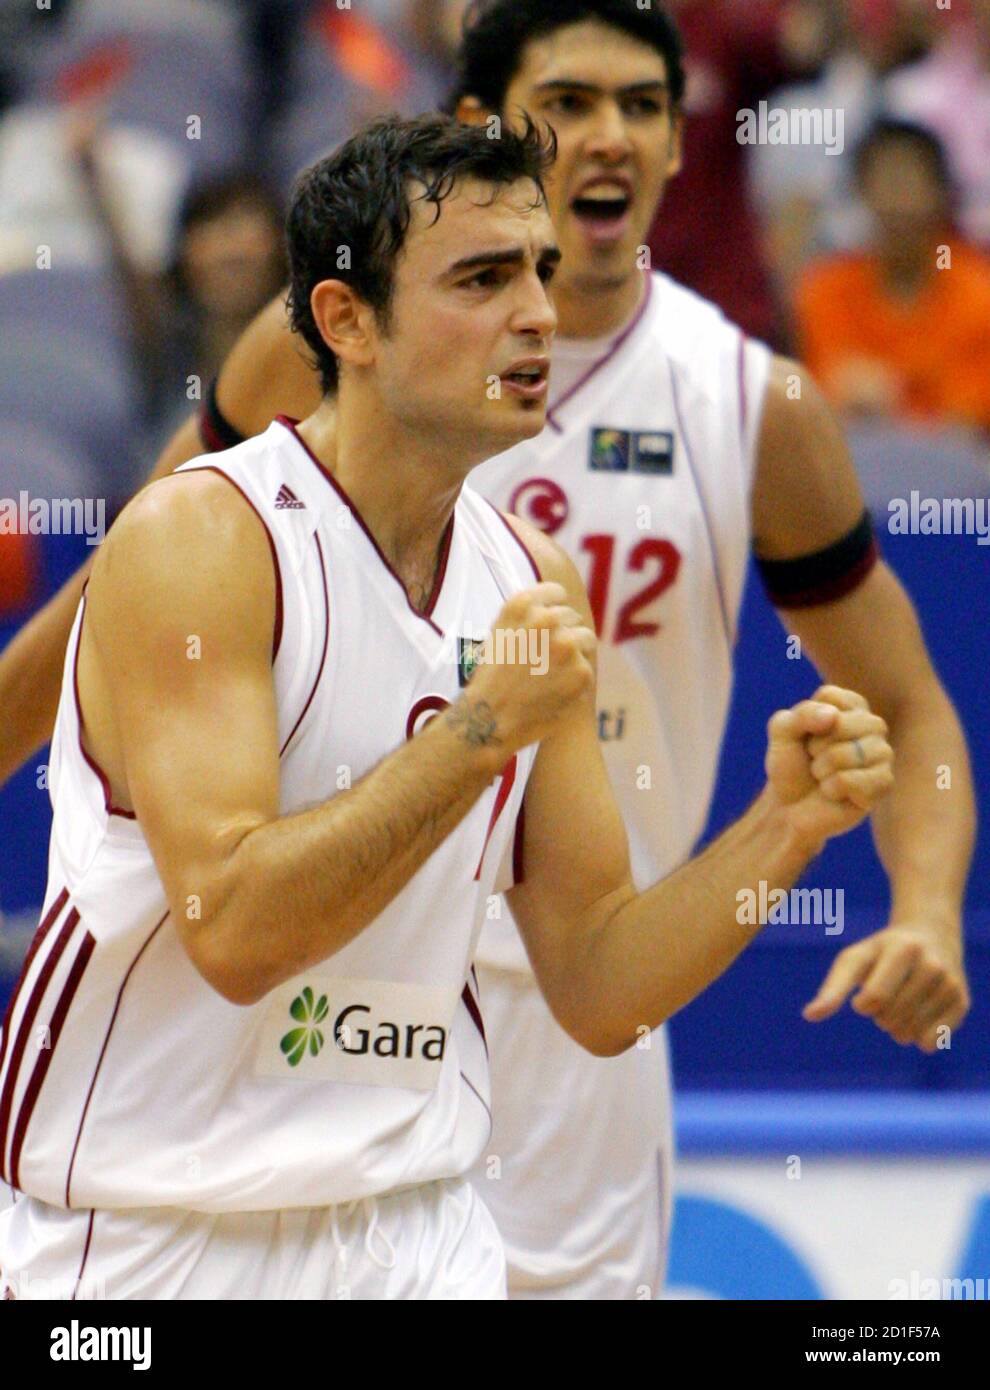 Turkey's Ender Arslan (L) celebrates with his team mate Kerem Gonlum after his game-winning score against Lithuania during their first round match at the world basketball championships in Hamamatsu, central Japan, August 19, 2006.  REUTERS/Issei Kato (JAPAN) Stock Photo